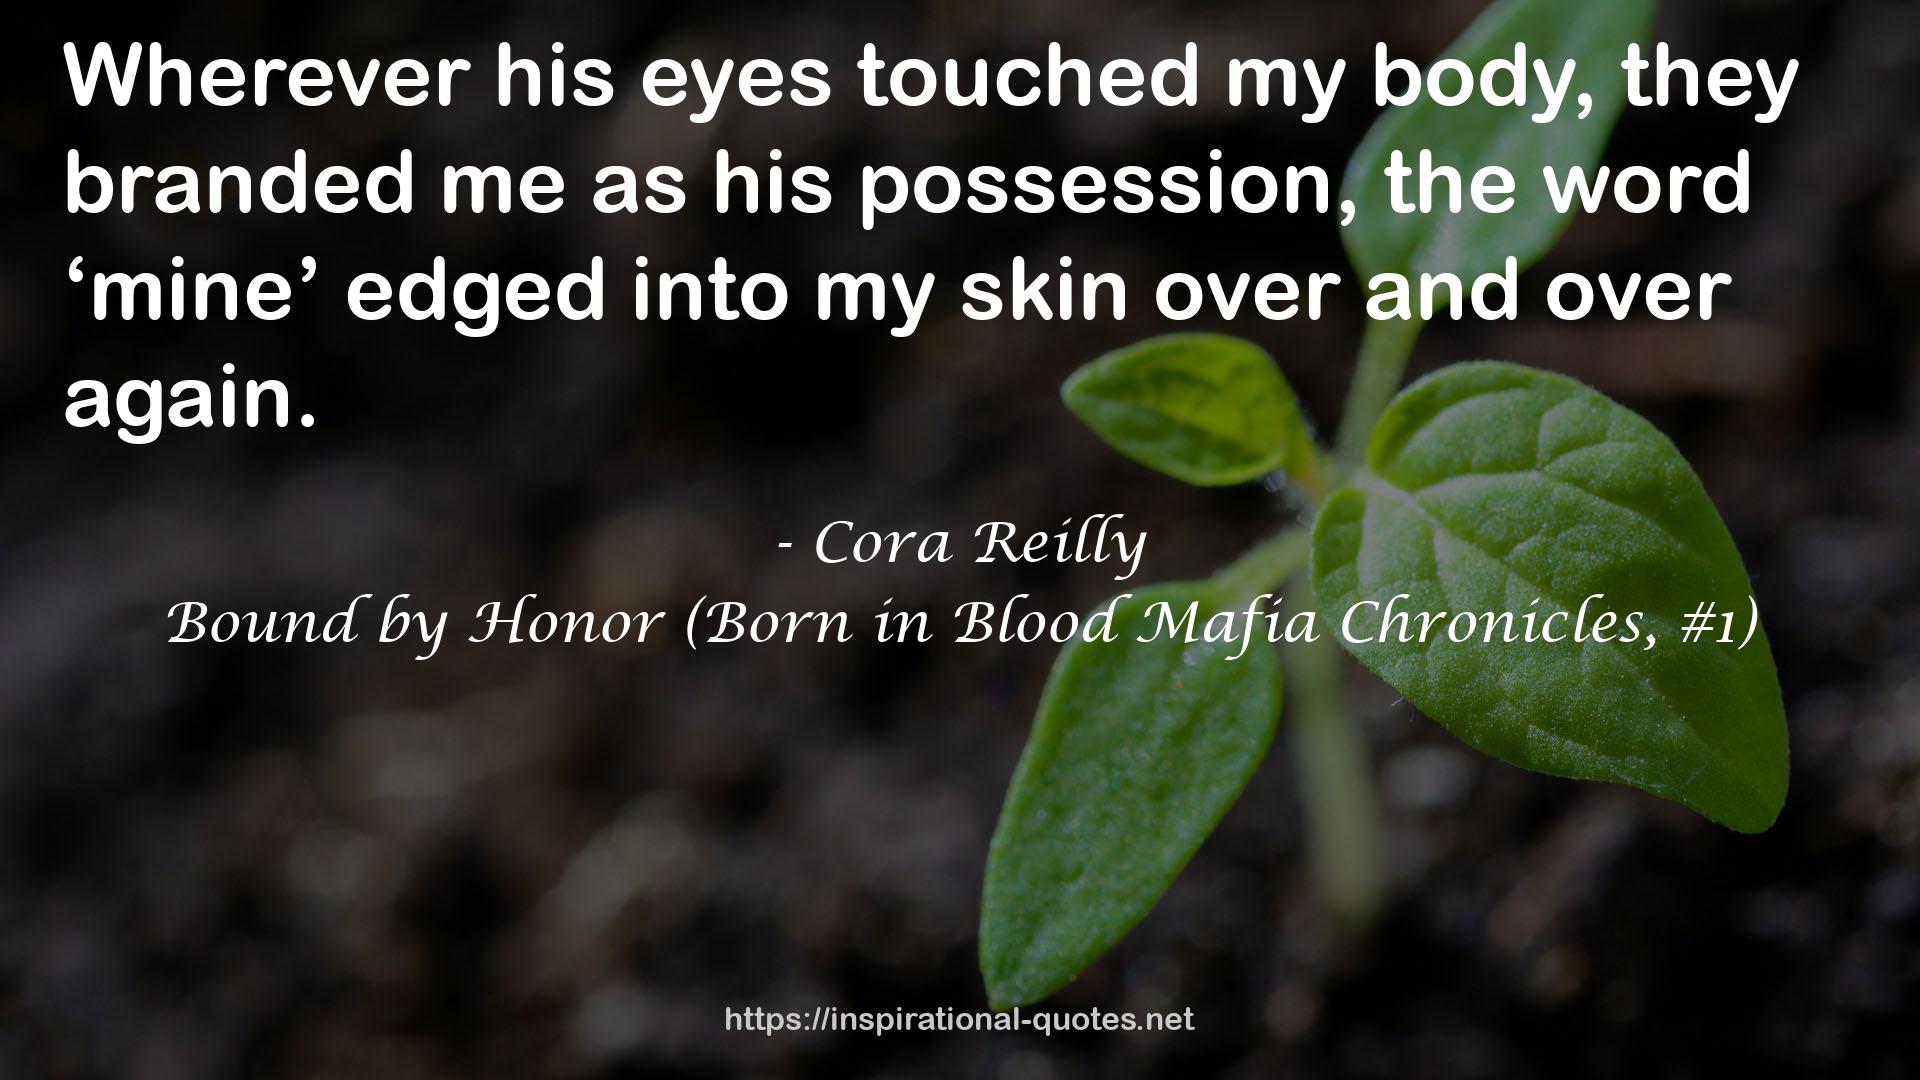 Bound by Honor (Born in Blood Mafia Chronicles, #1) QUOTES